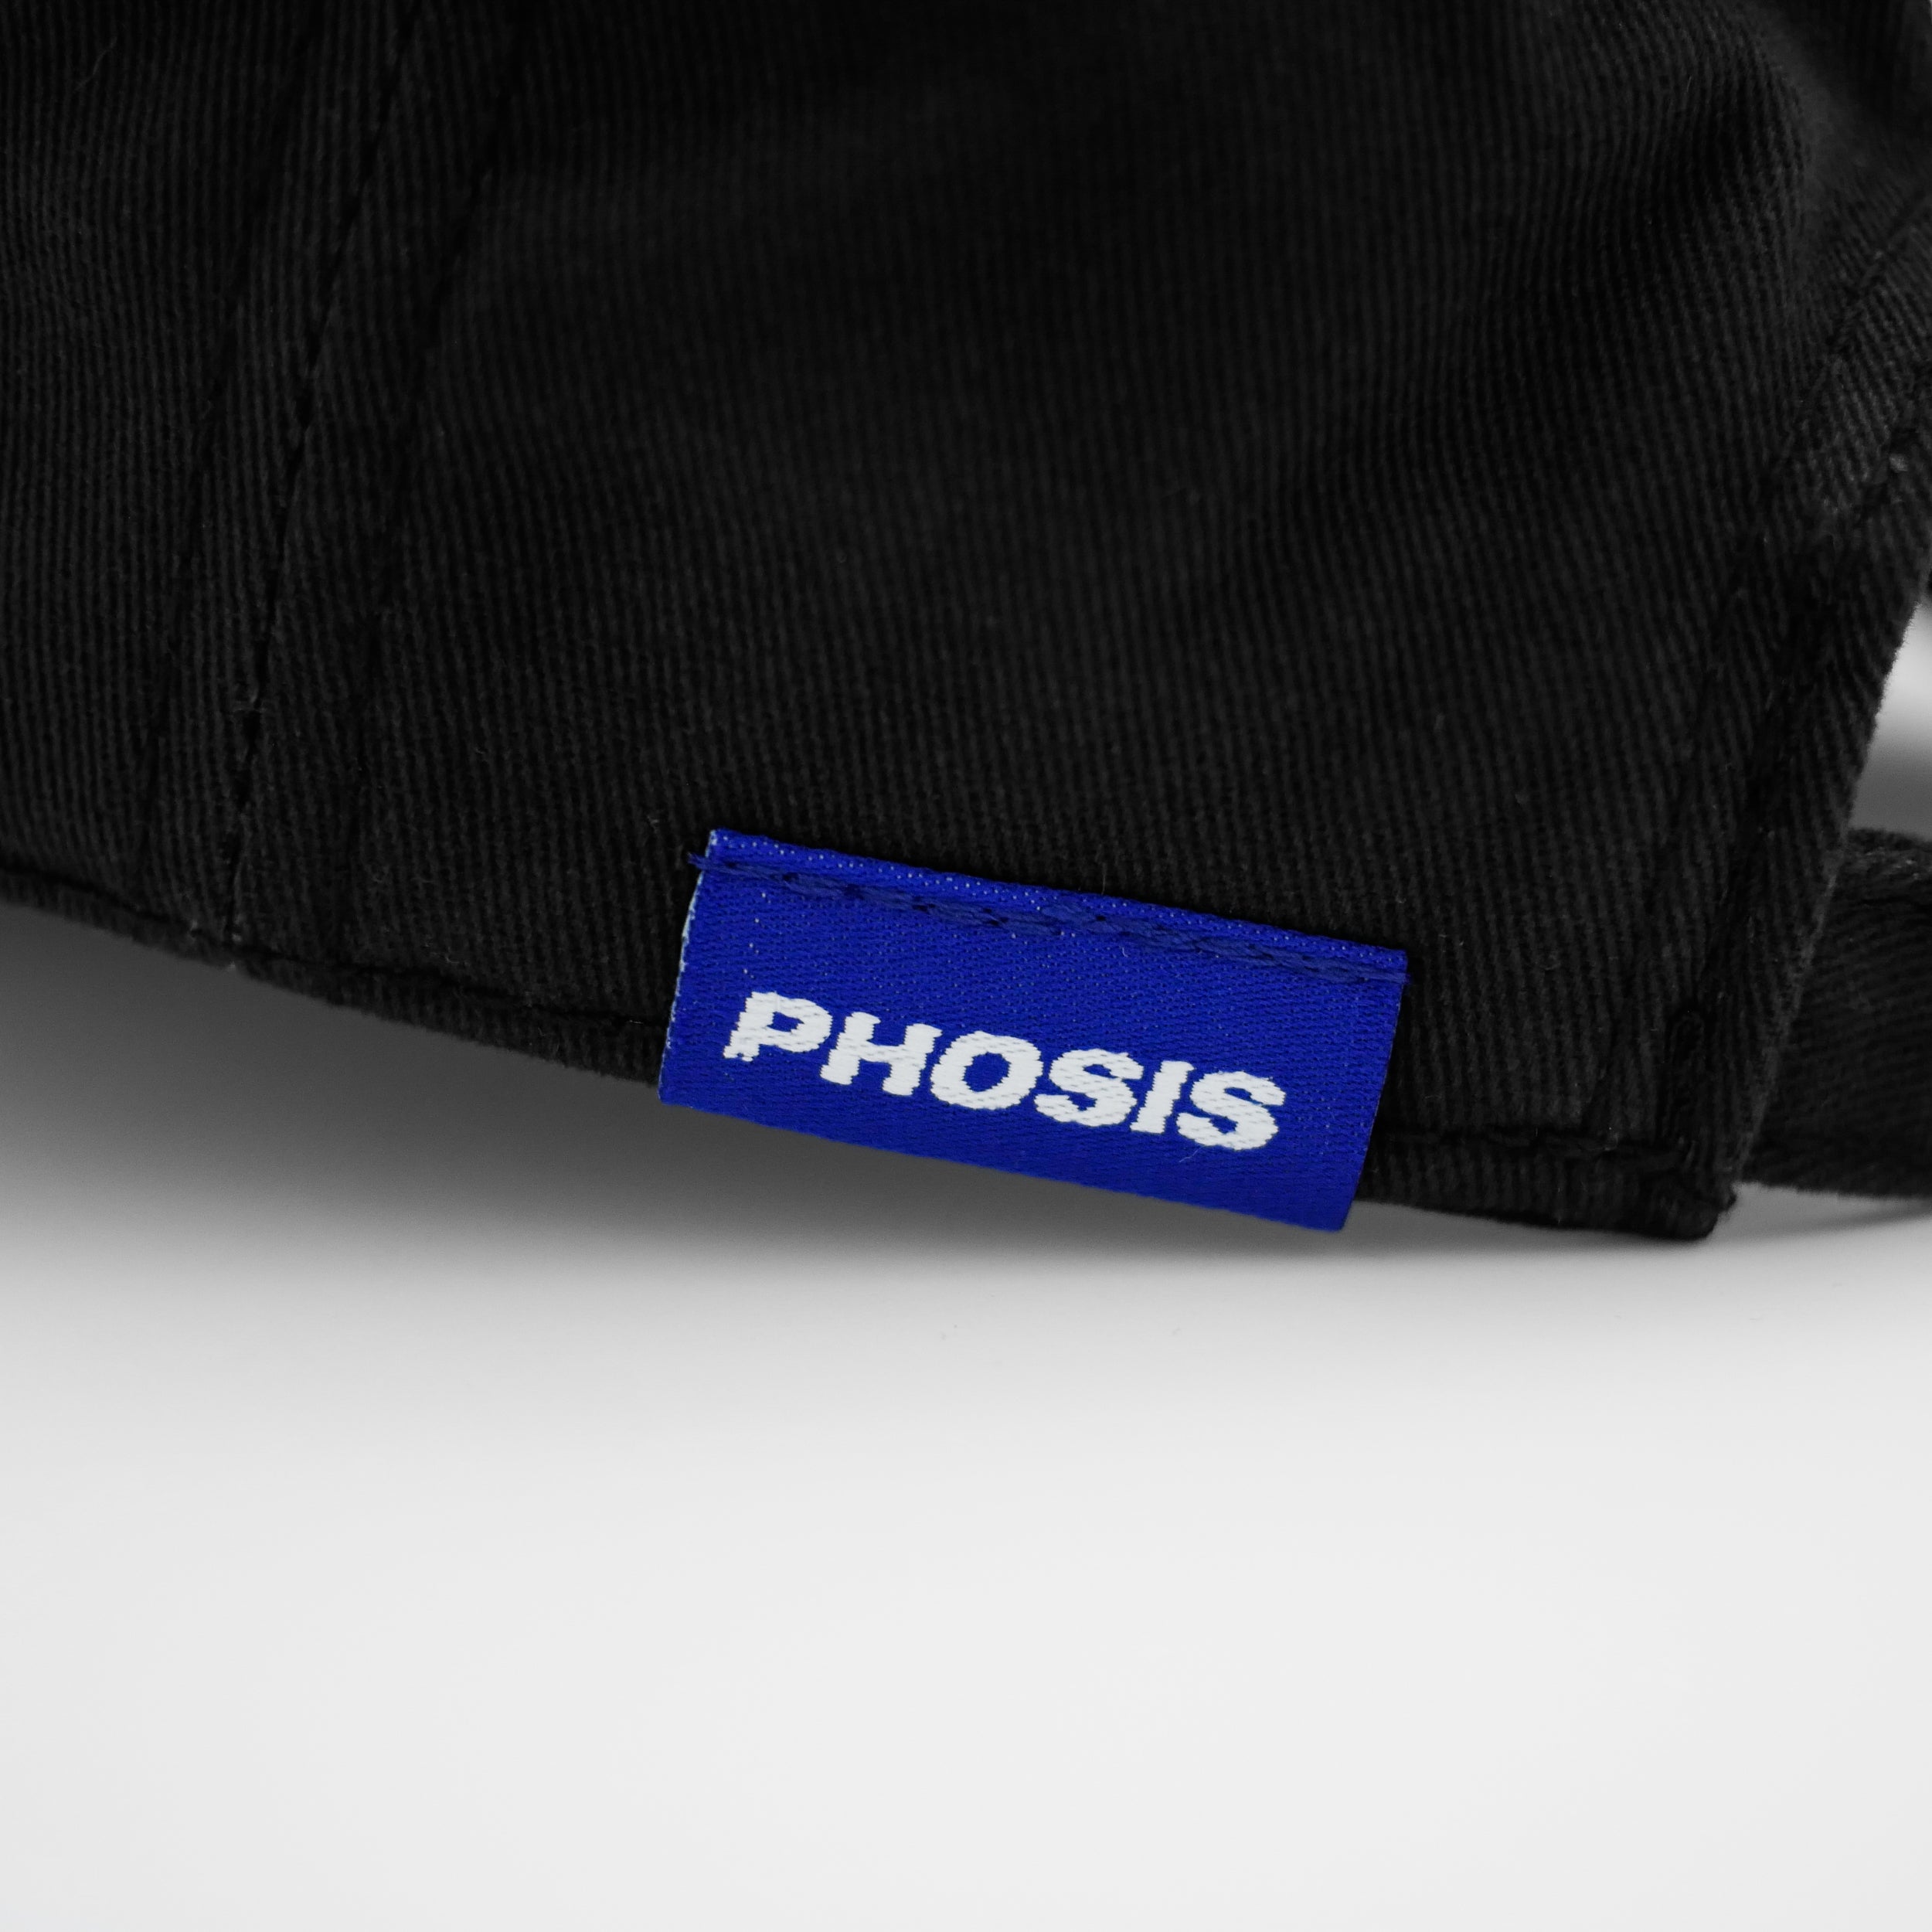 Close up view of the woven label in the OLD ENGLISH "PHOSIS" black dad hat from PHOSIS® Clothing